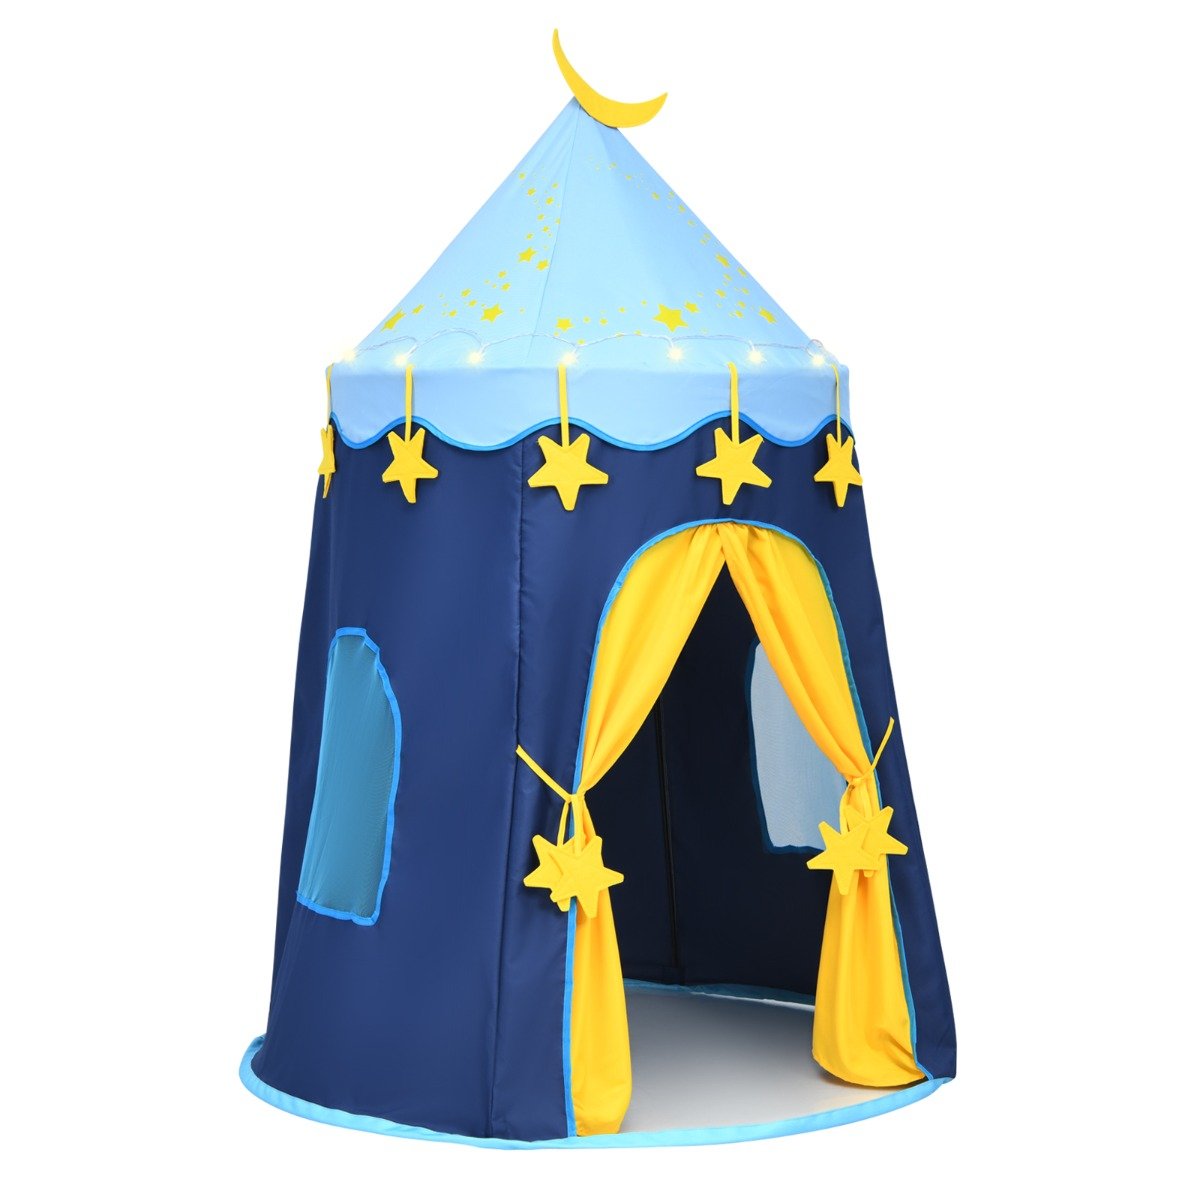 Dreamy Adventures: Foldable Kids Play Tent with Star Lights & Bag